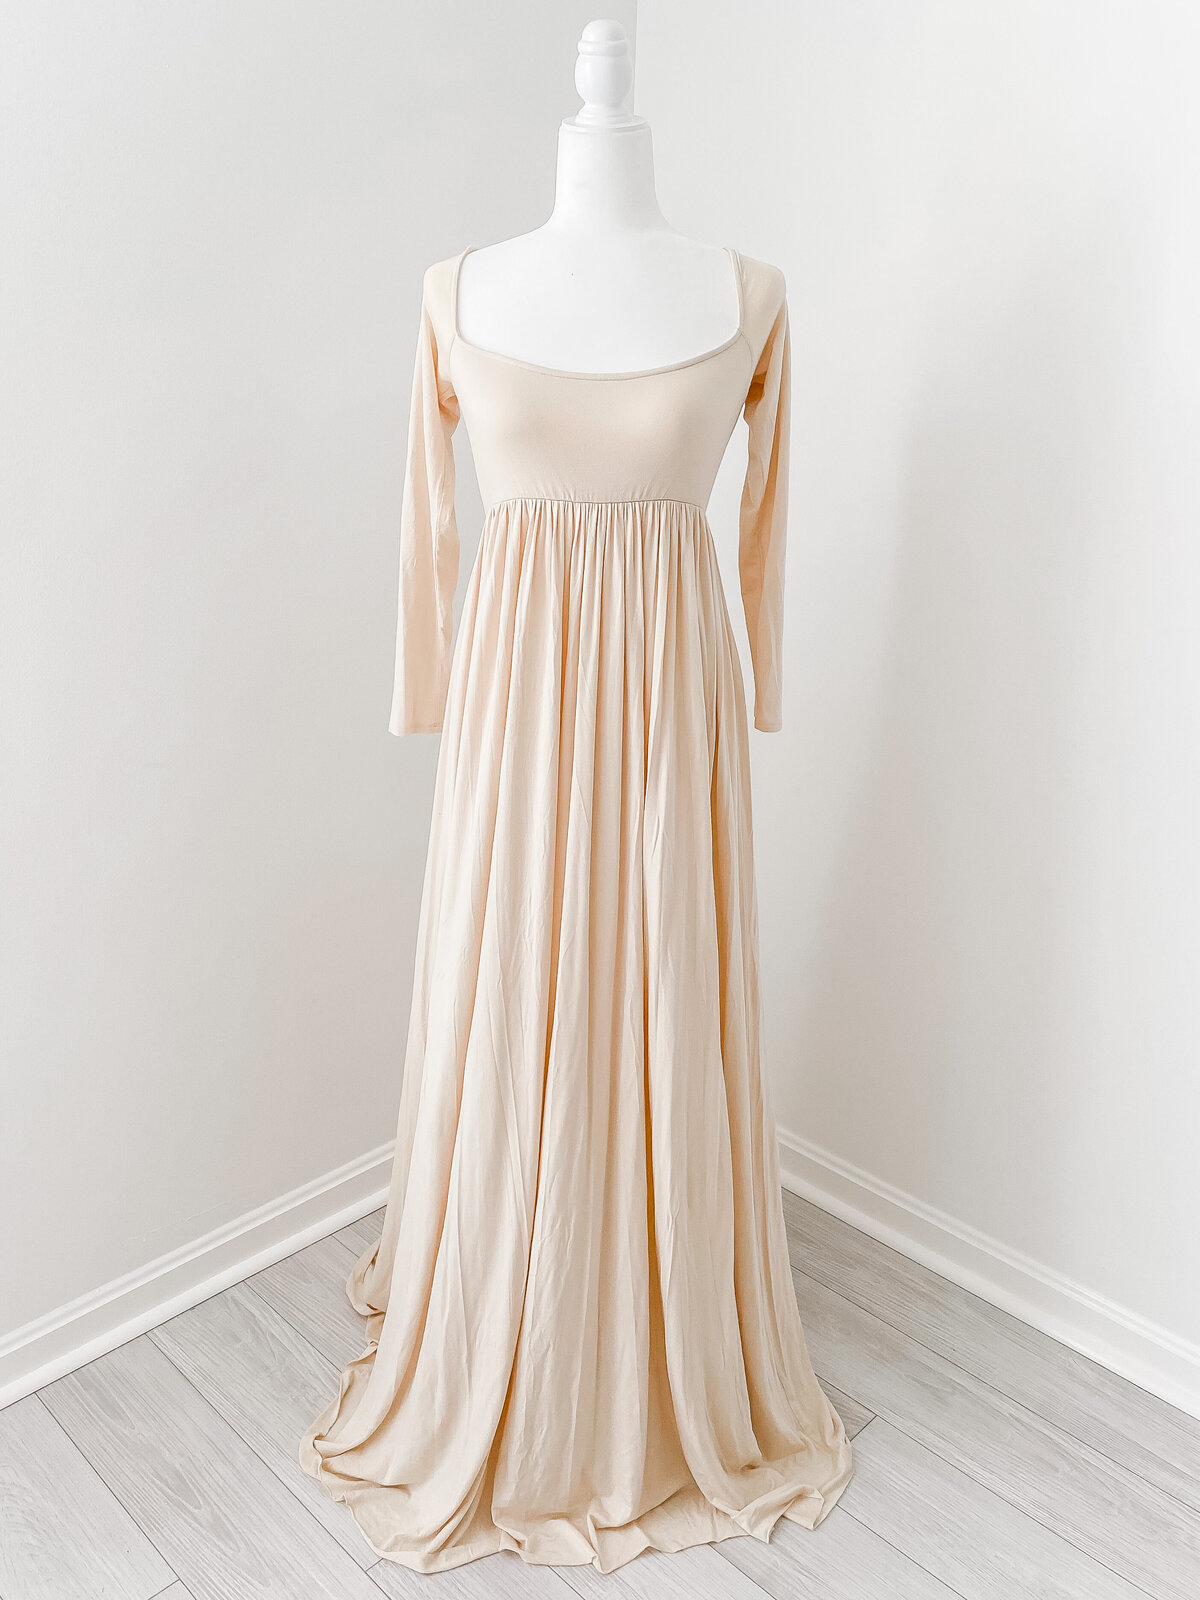 A long sleeve cream colored maxi dress from DC Family Photographer's client wardrobe